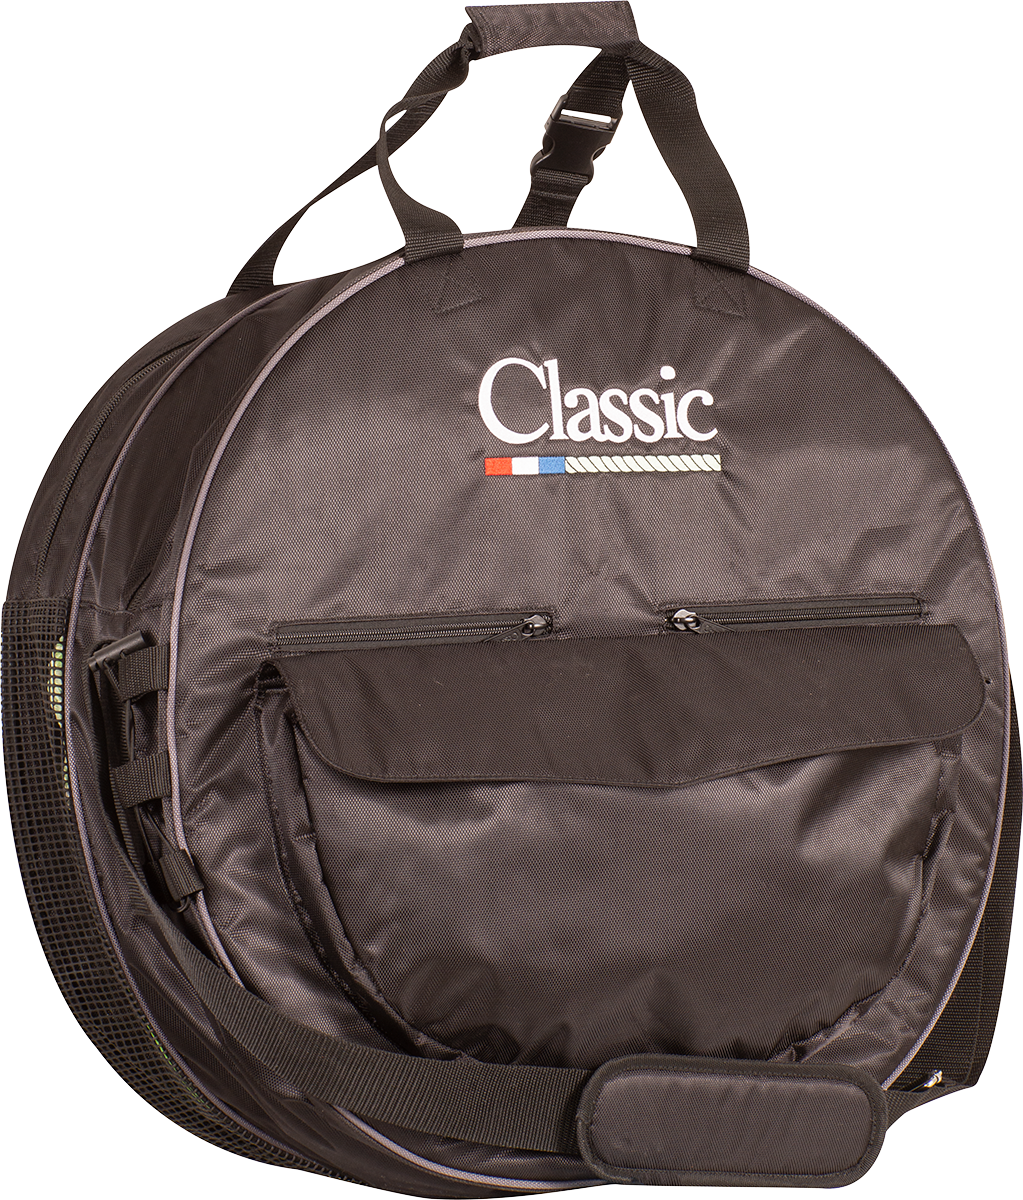 Classic Rope Black Deluxe Rope Bag